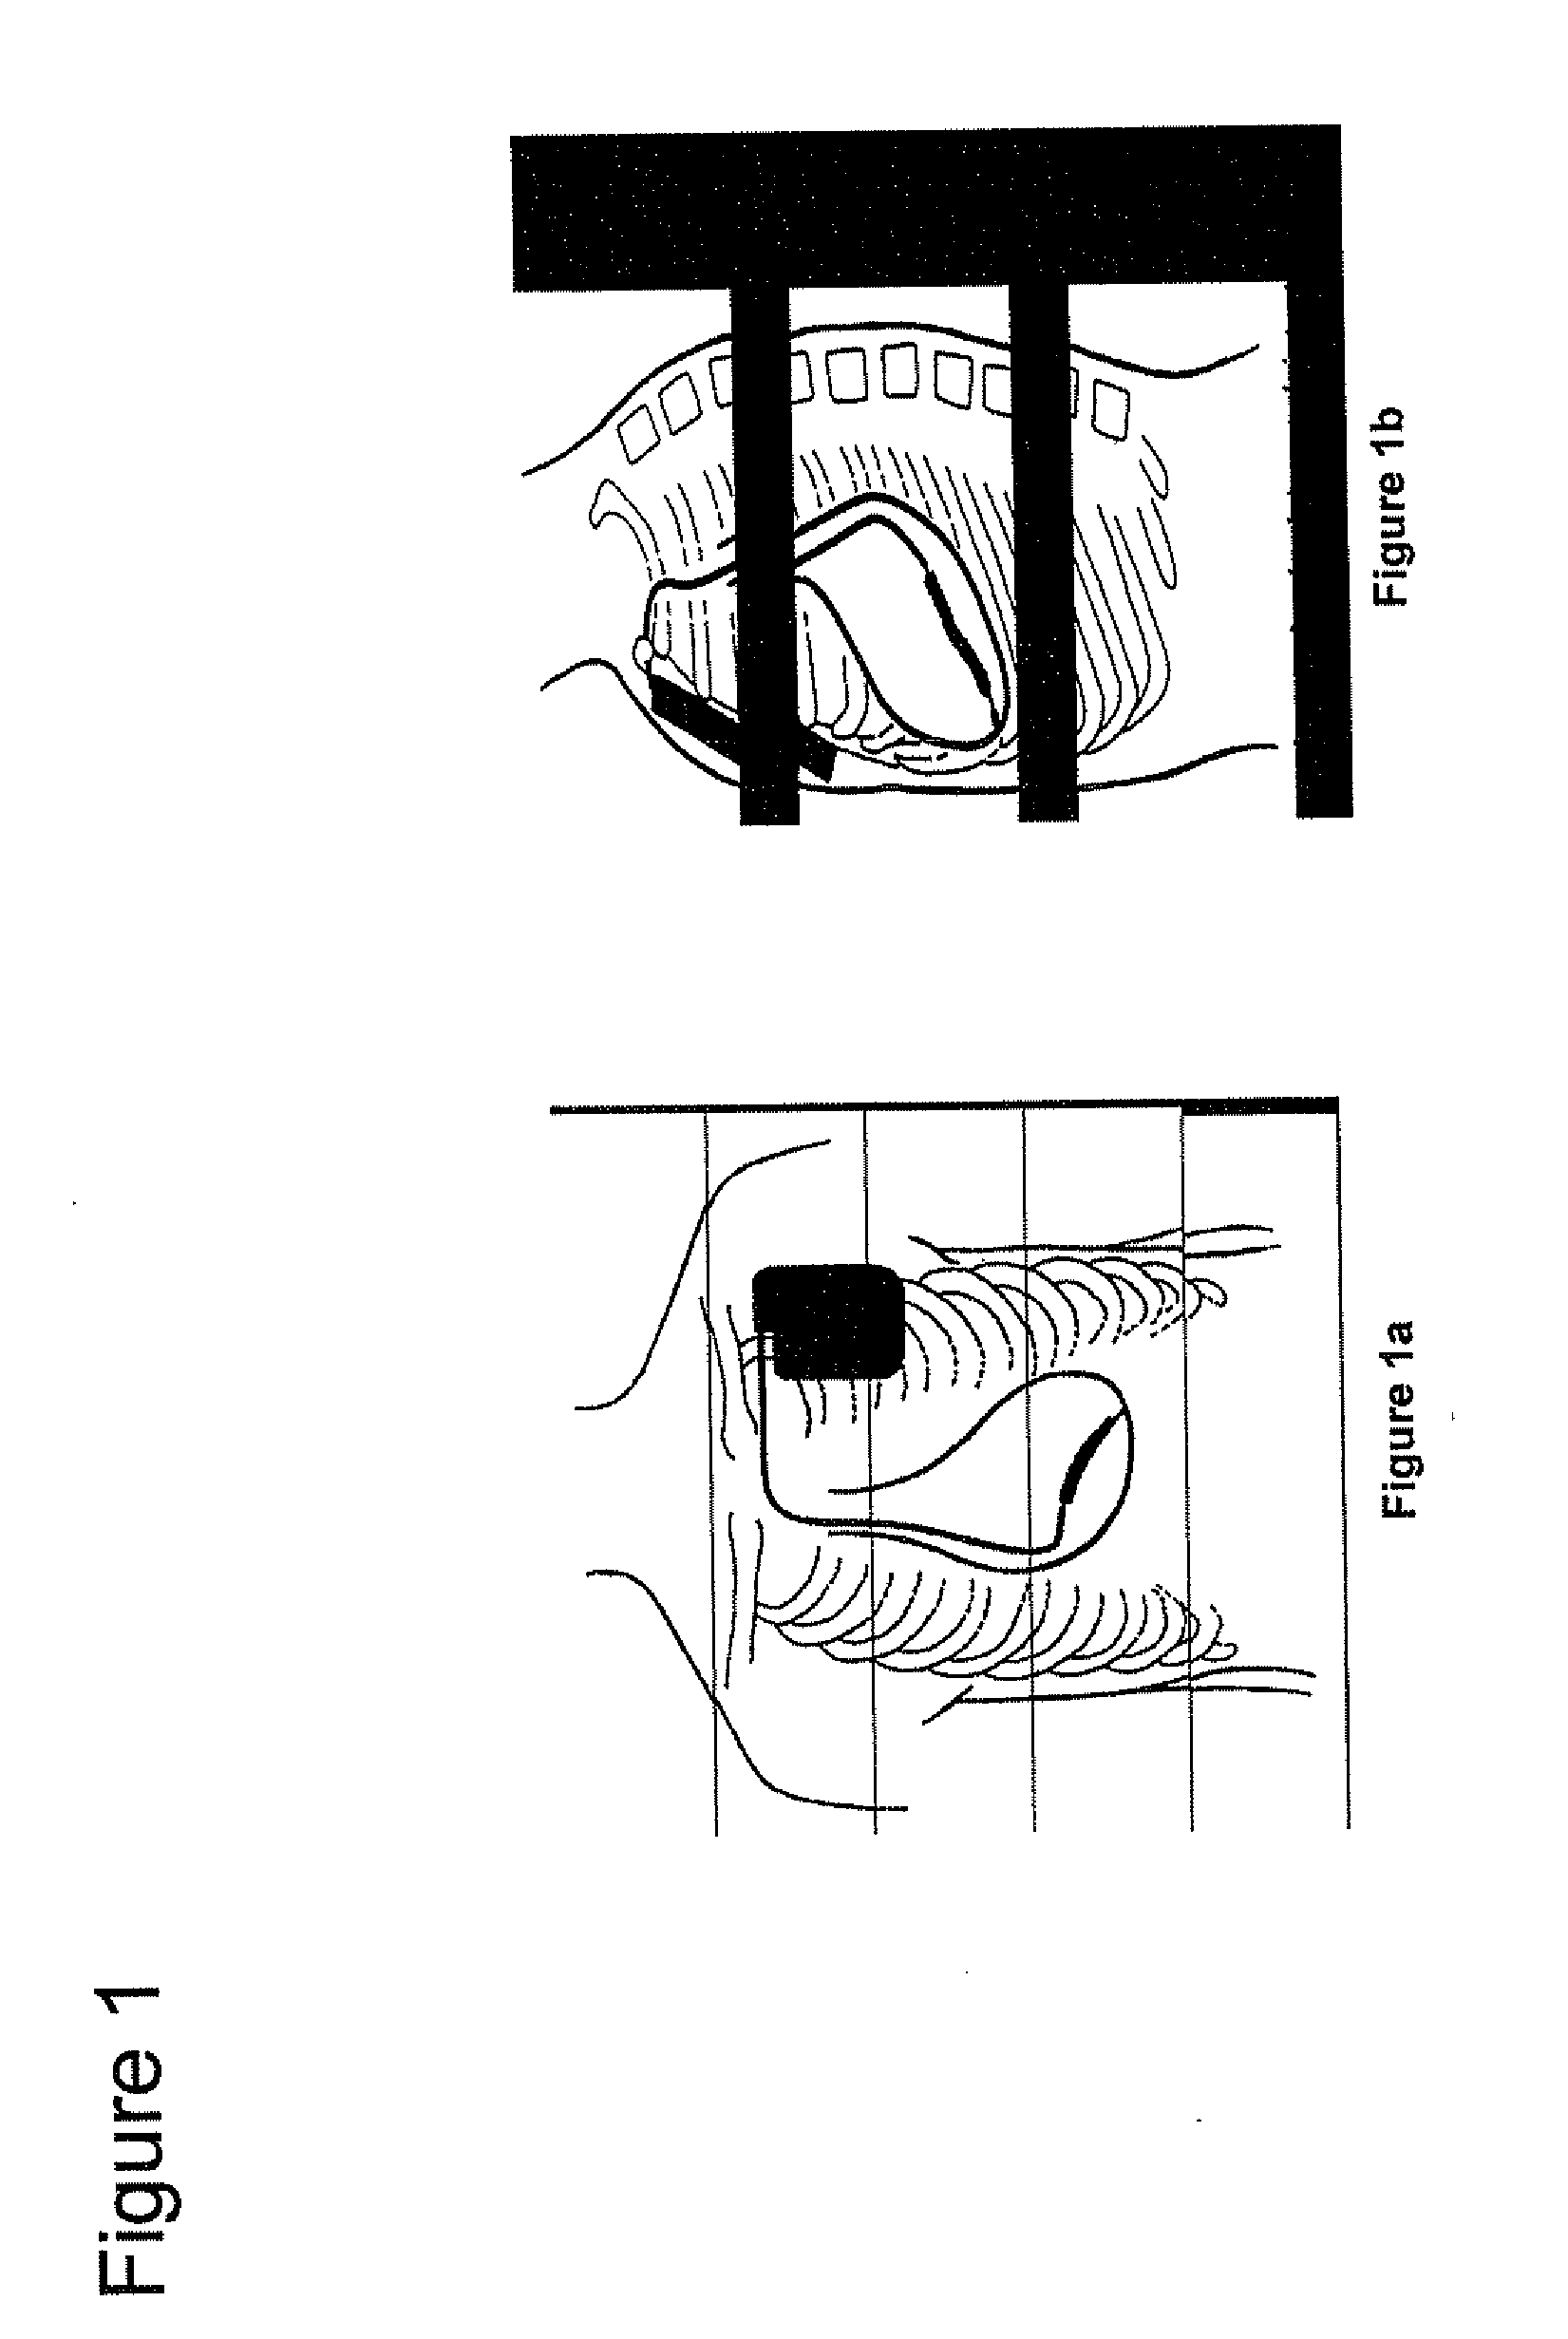 Method and apparatus for detection and treatment of autonomic system imbalance